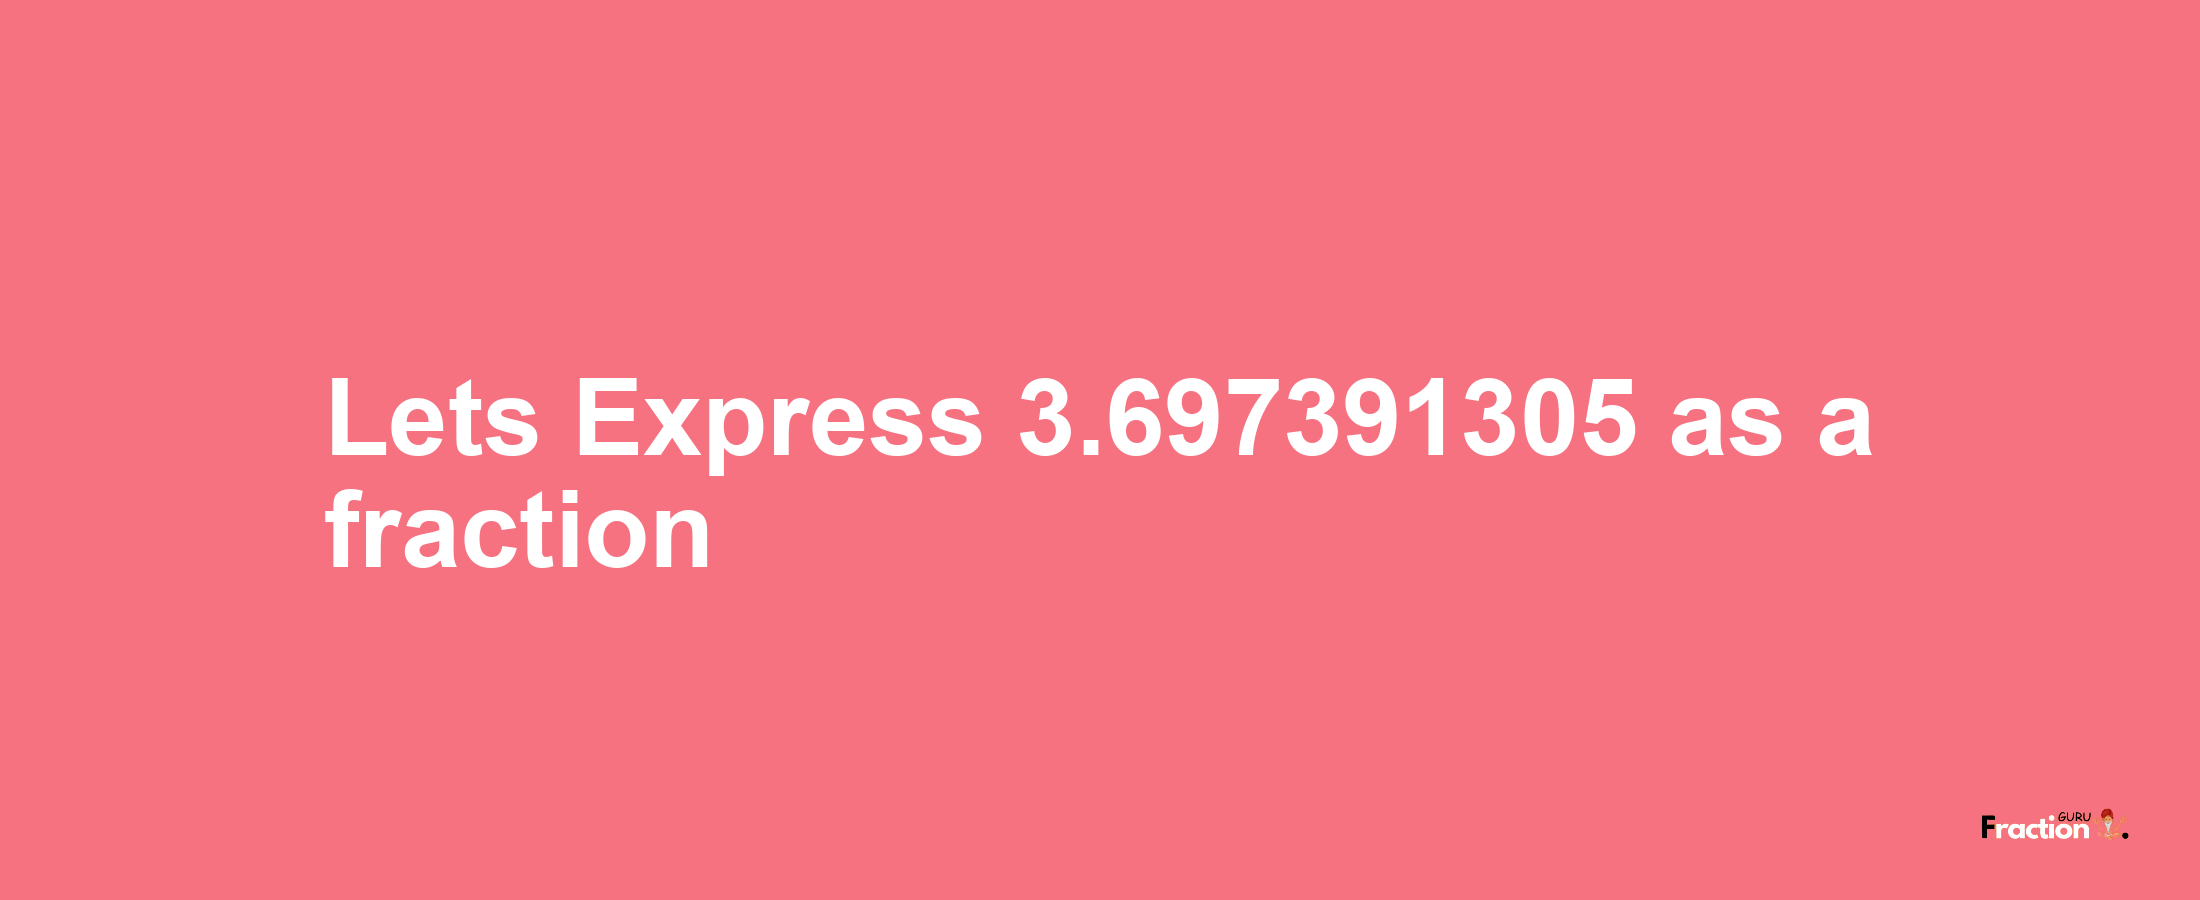 Lets Express 3.697391305 as afraction